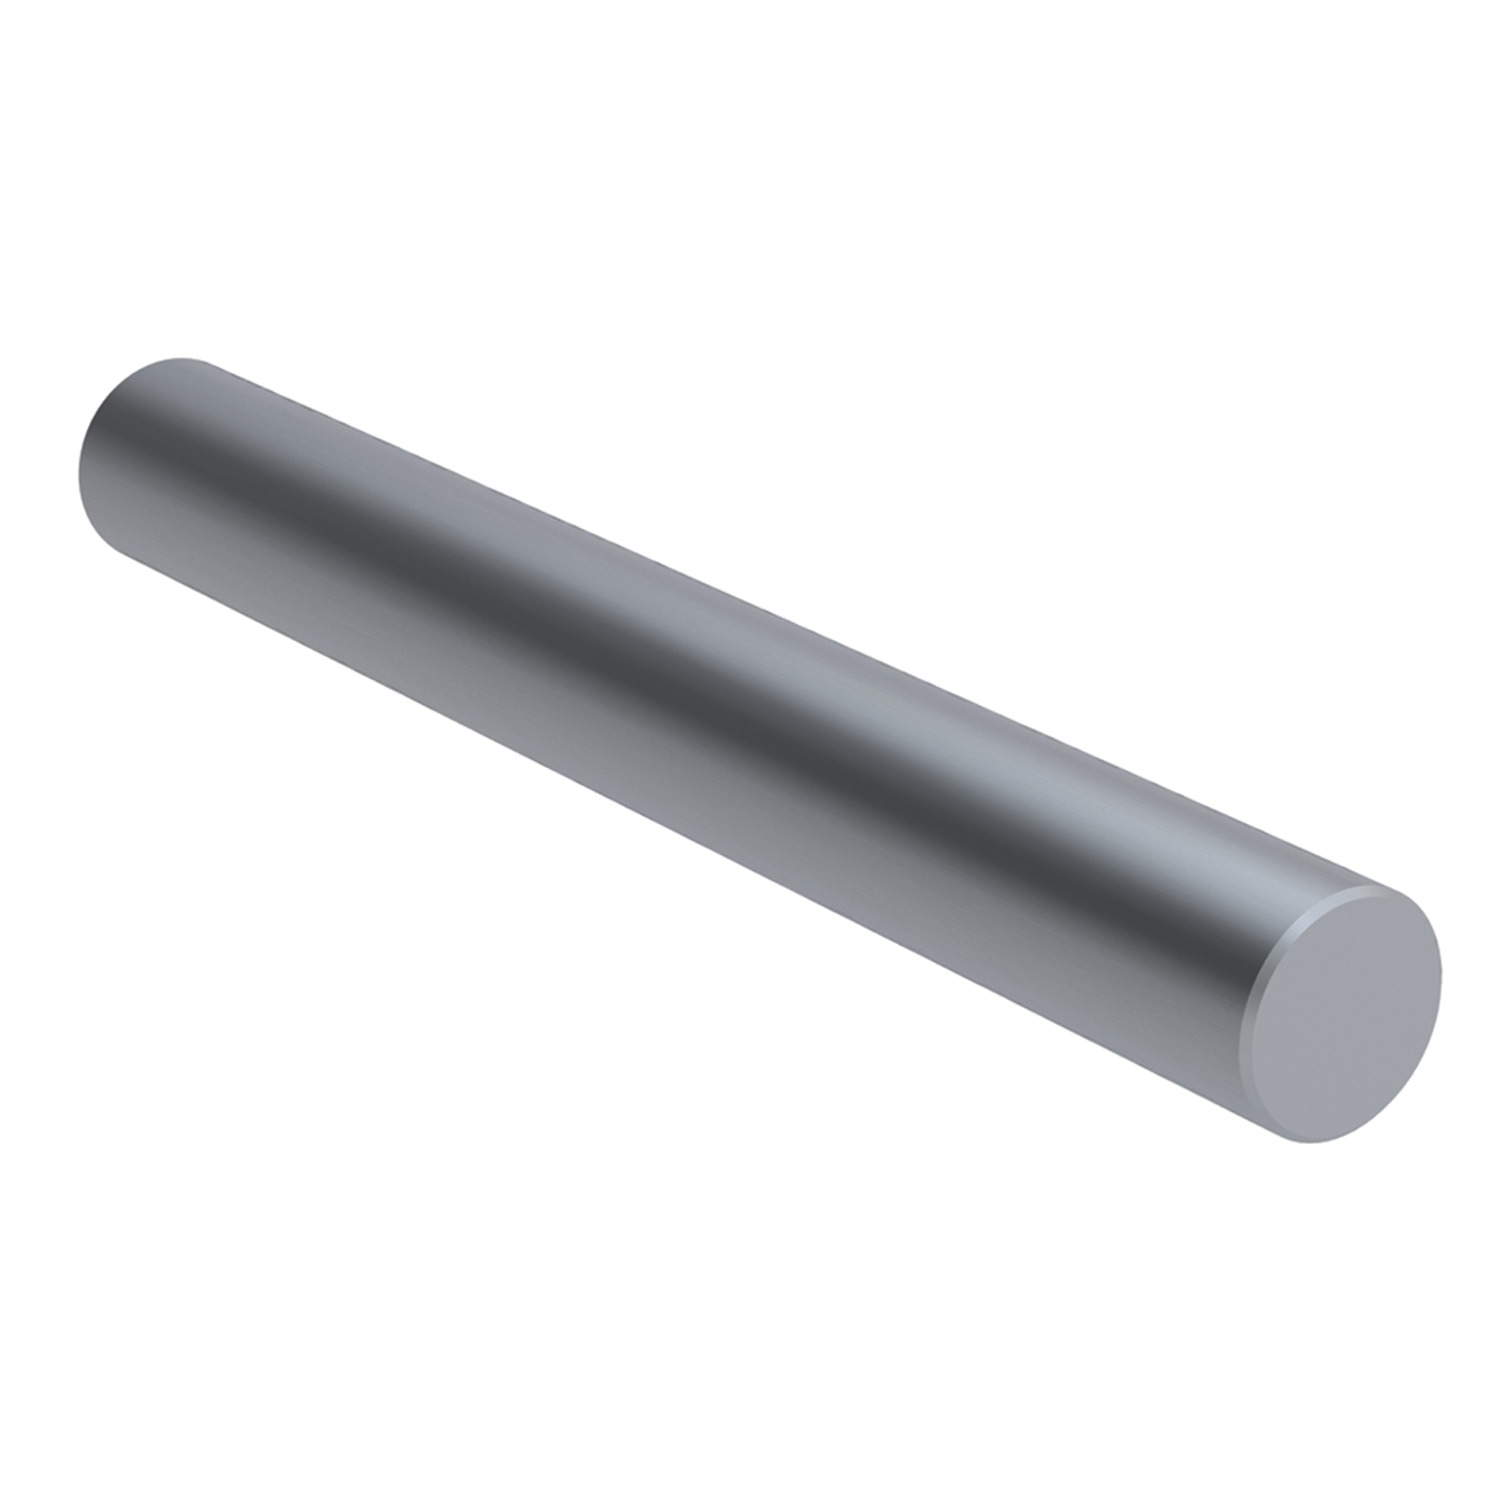 Product L1772.16, Ø16 Hardened Stainless Shafts for linear bearings / 